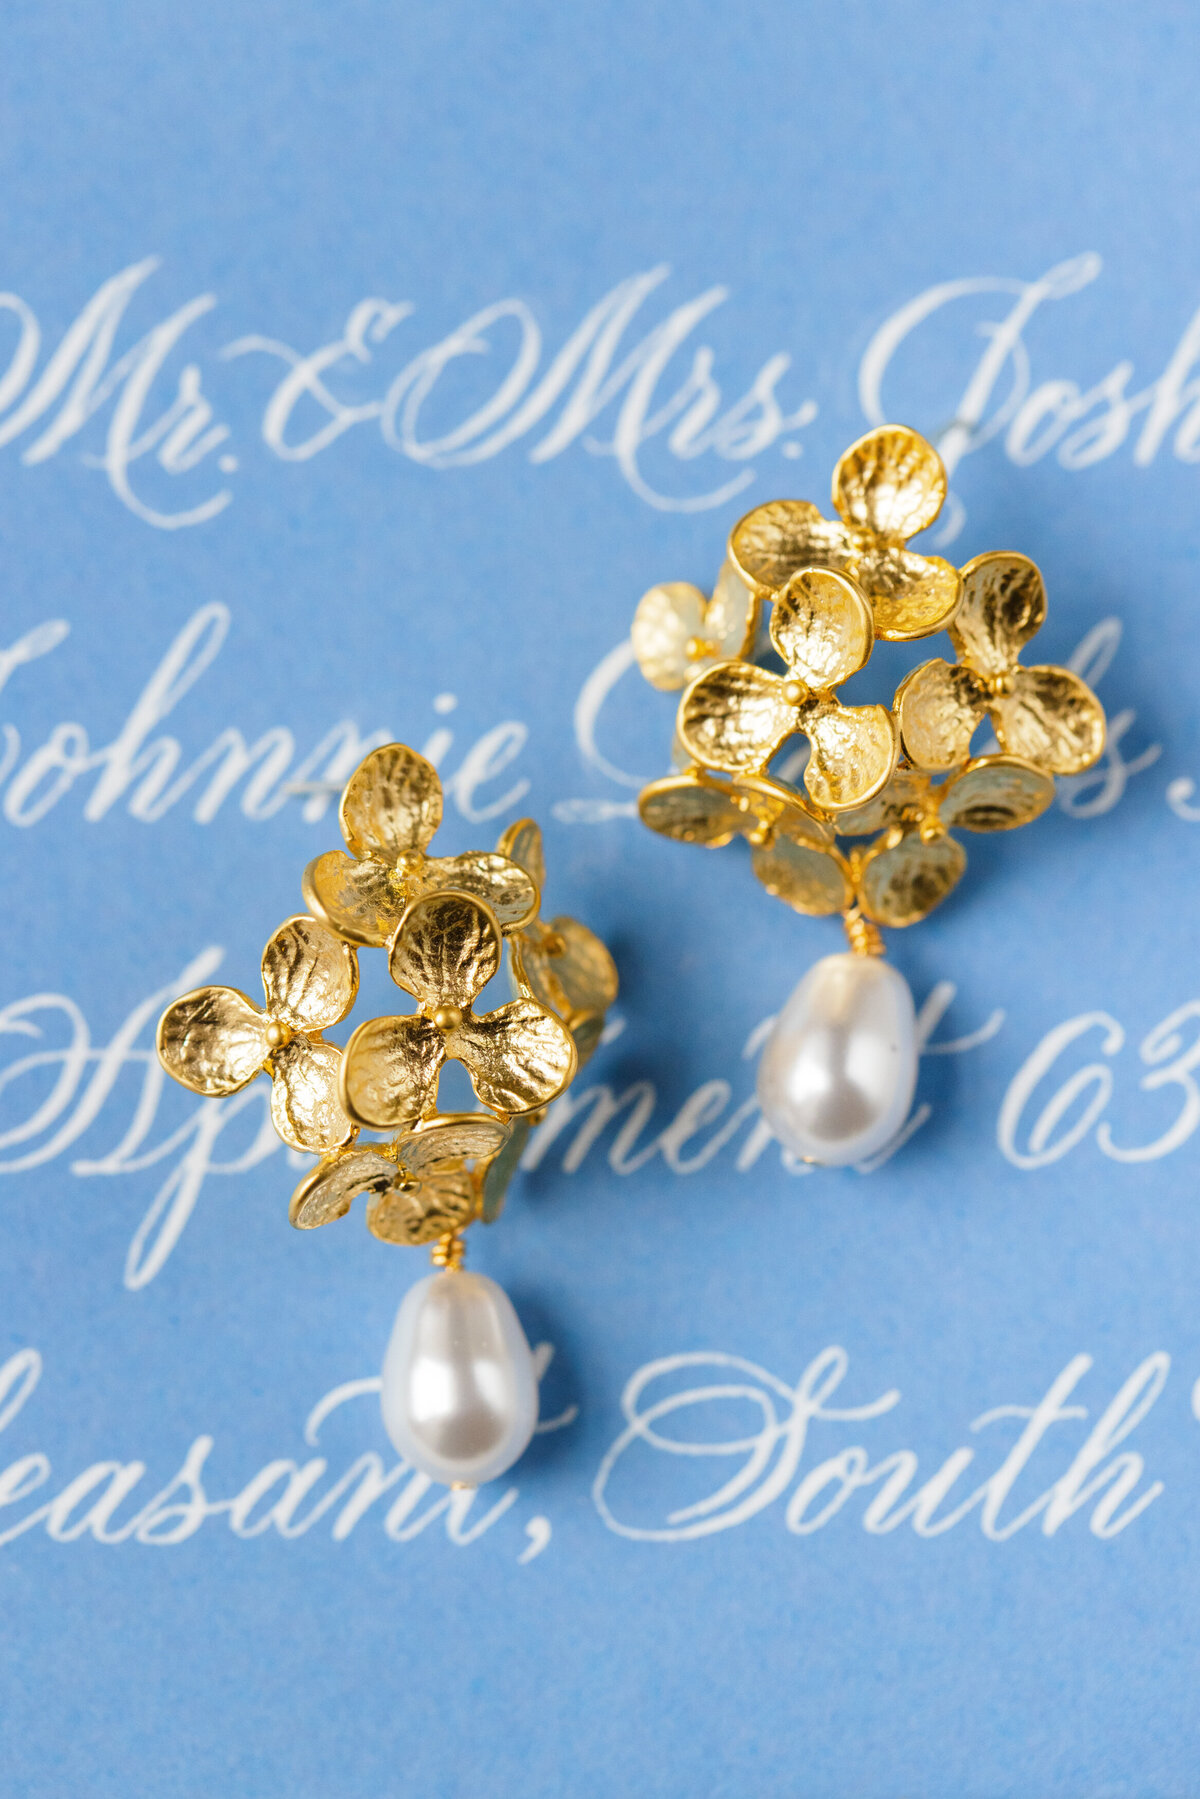 gold and pearl floral earrings styled on calligraphed envelope